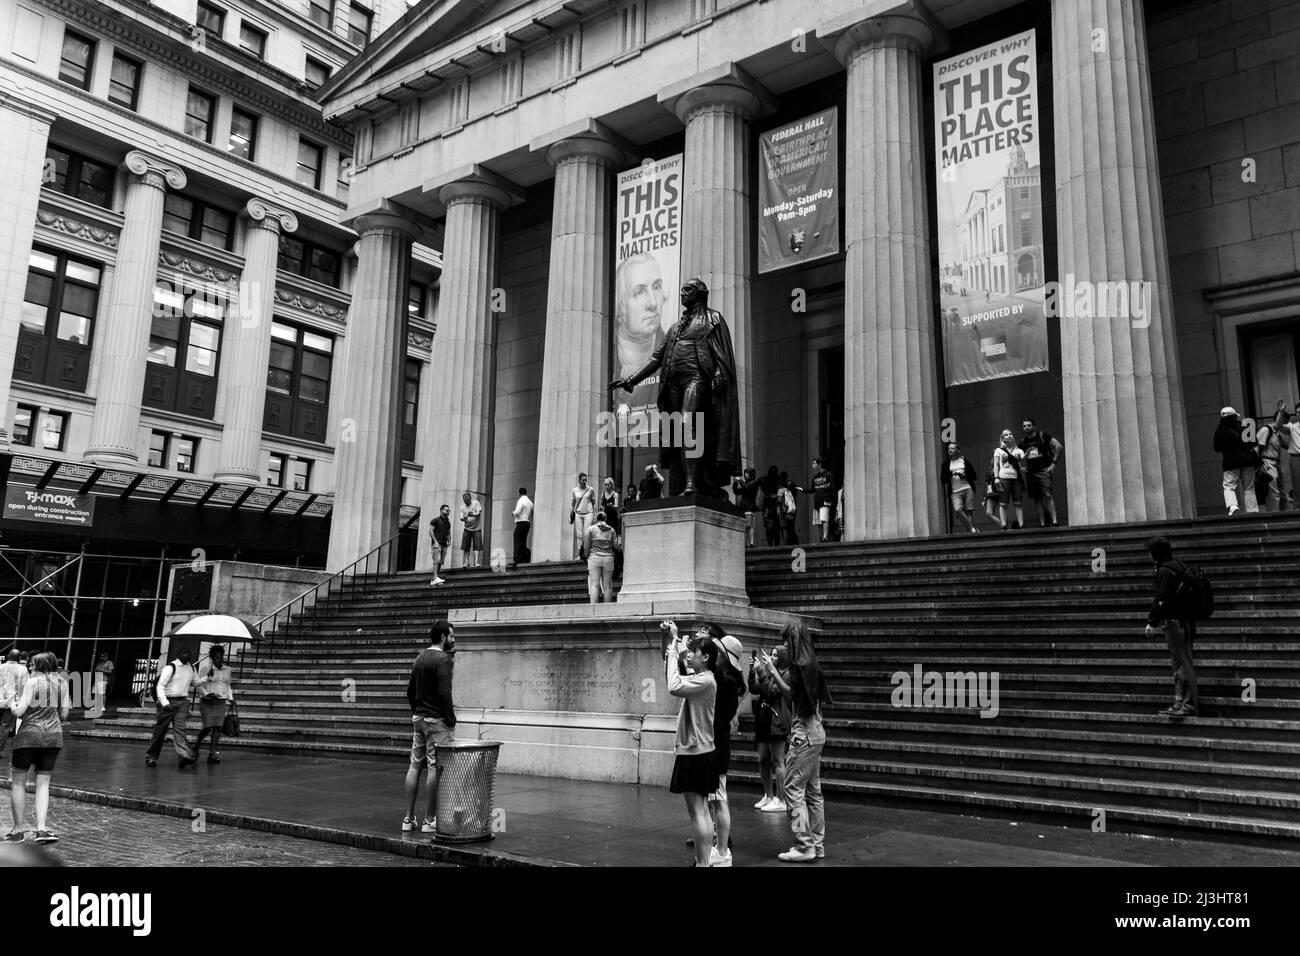 Wall Street Station, New York City, NY, USA, Facade of the Federal Hall with Washington Statue on the front Stock Photo